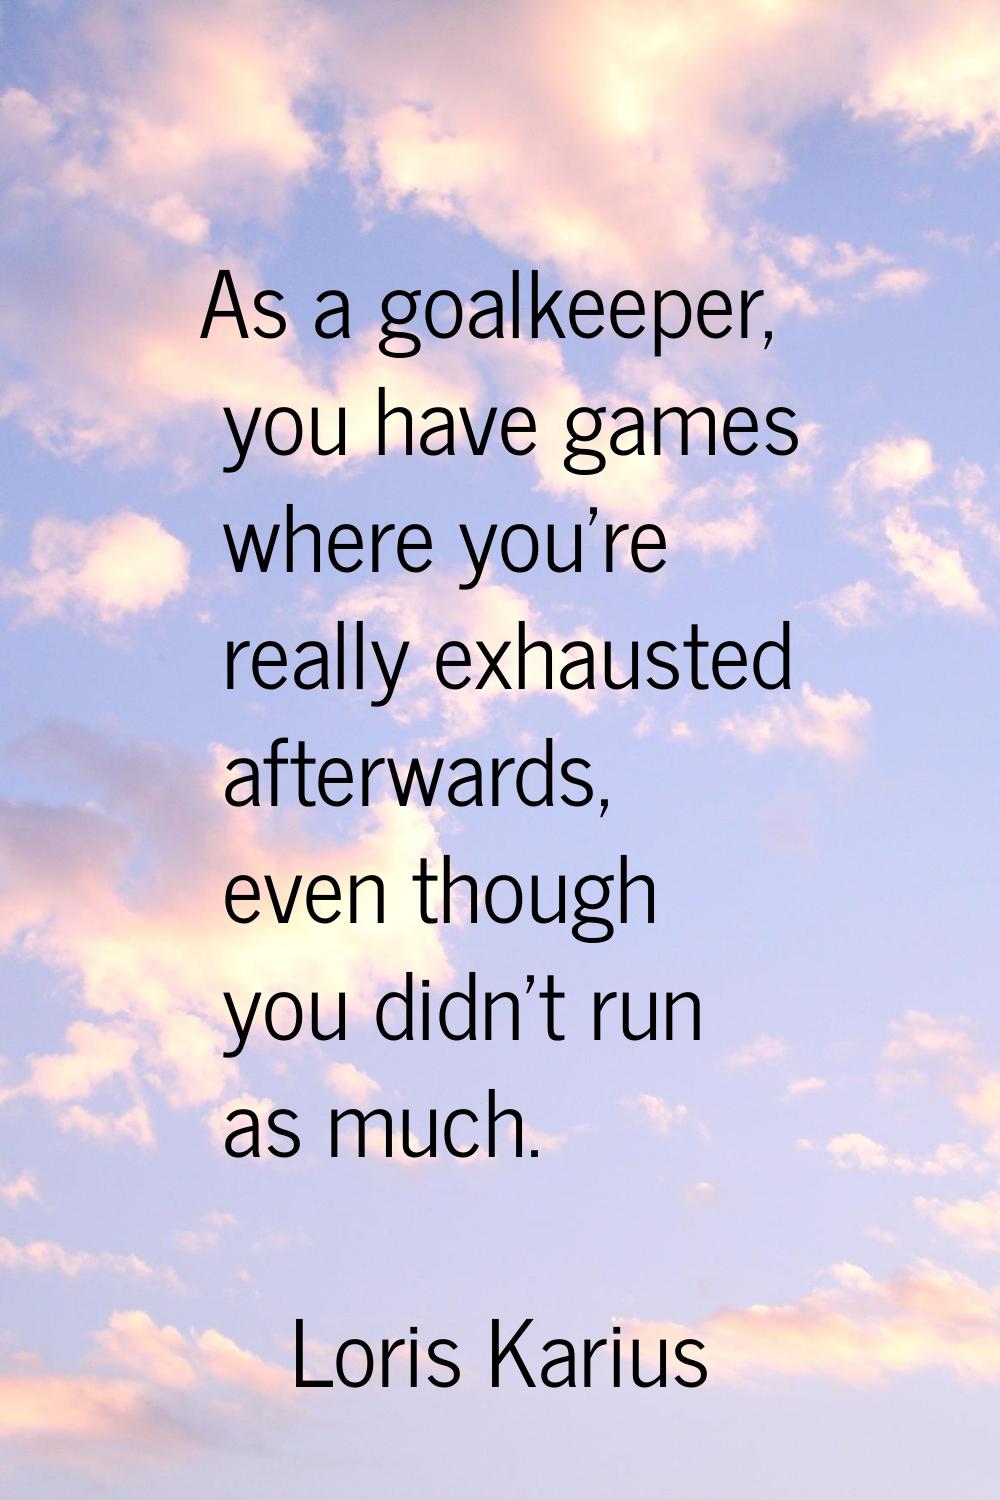 As a goalkeeper, you have games where you're really exhausted afterwards, even though you didn't ru